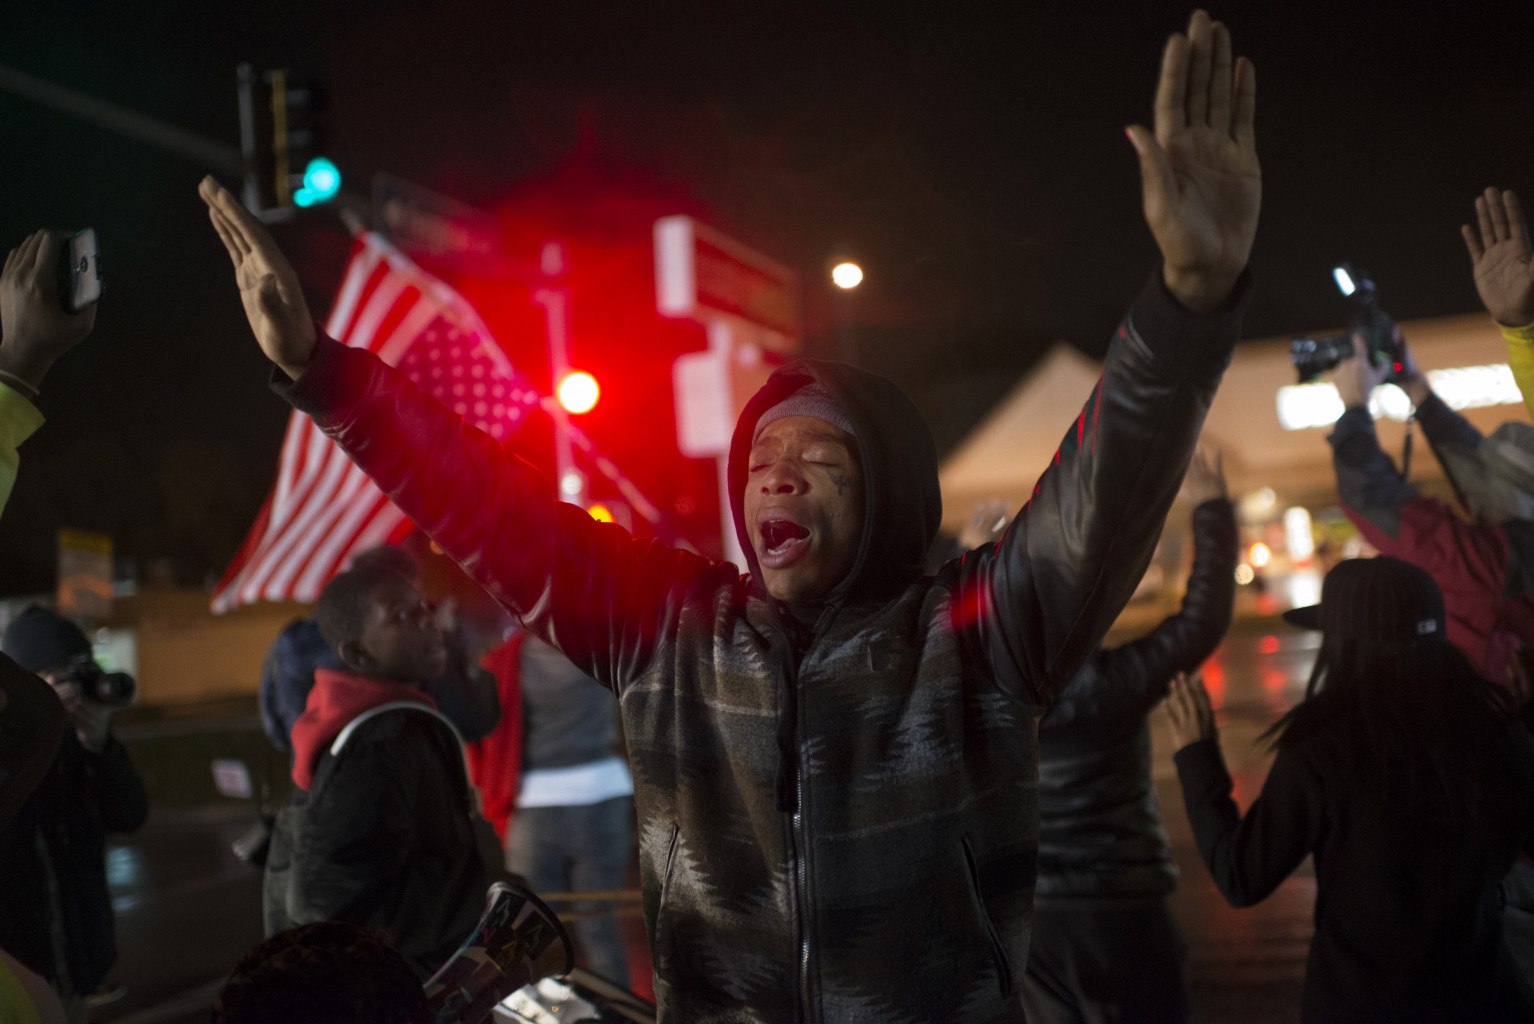 ©Jon Lowenstein / NOOR Caption: USA, Missouri, Ferguson, 2014, The weekend before the Grand Jury verdict residents of the Canfield neighborhood and protestors marched to the memorial where Michael Brown was murdered. There they held a moment of silence and prayed that there would be justice for Mike Brown. On Monday evening it became apparent that there wouldn't be any justice as the Grand Jury decided not to indict Officer Darren Wilson on any charges. Protestors exploded after the verdict and went on to burn 21 buildings as well as do a lot more damage to the town. The protests continue. IG : @jonlowenstein Twitter : @jonlowenstein